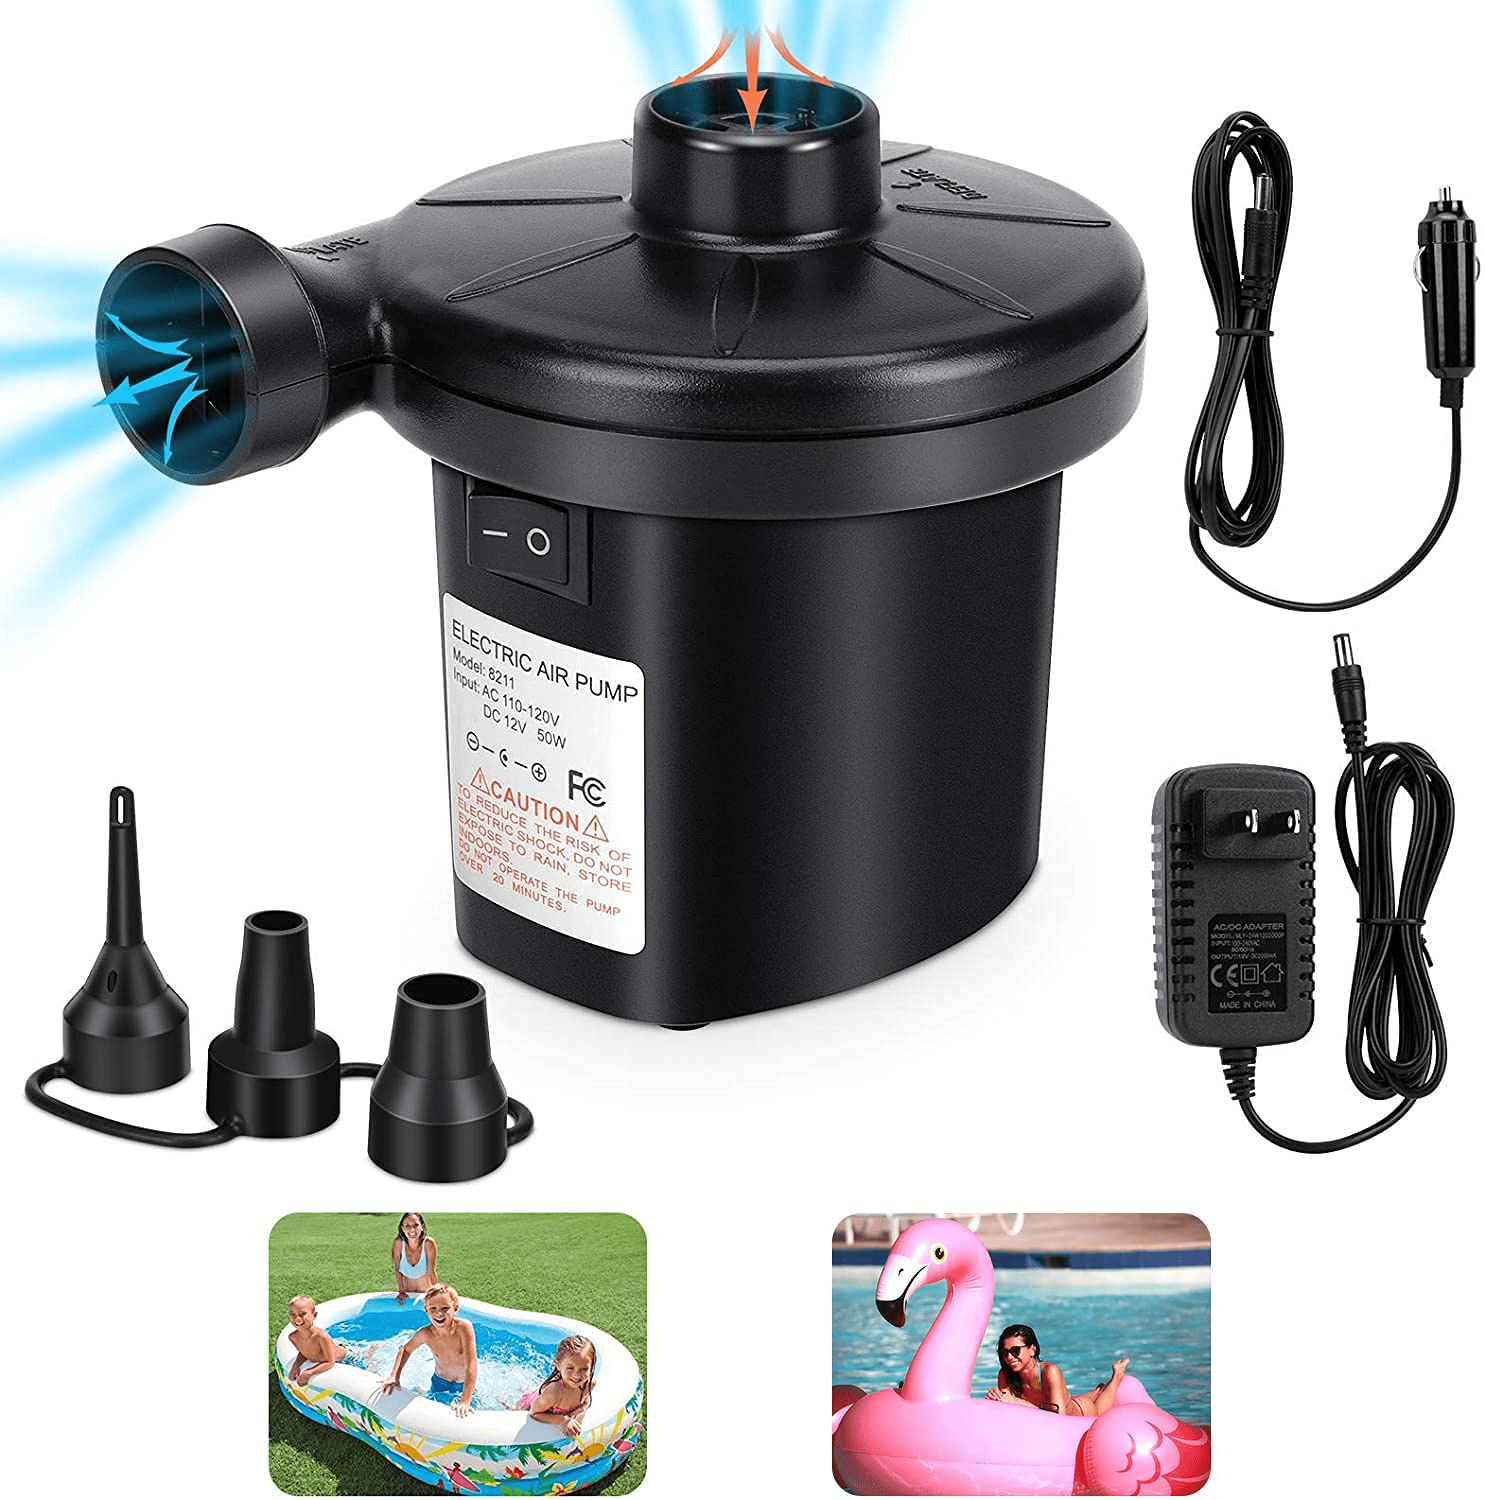 Electric Air Pump Inflator for Inflatables Camping Bed pool DC 12V Car Use 